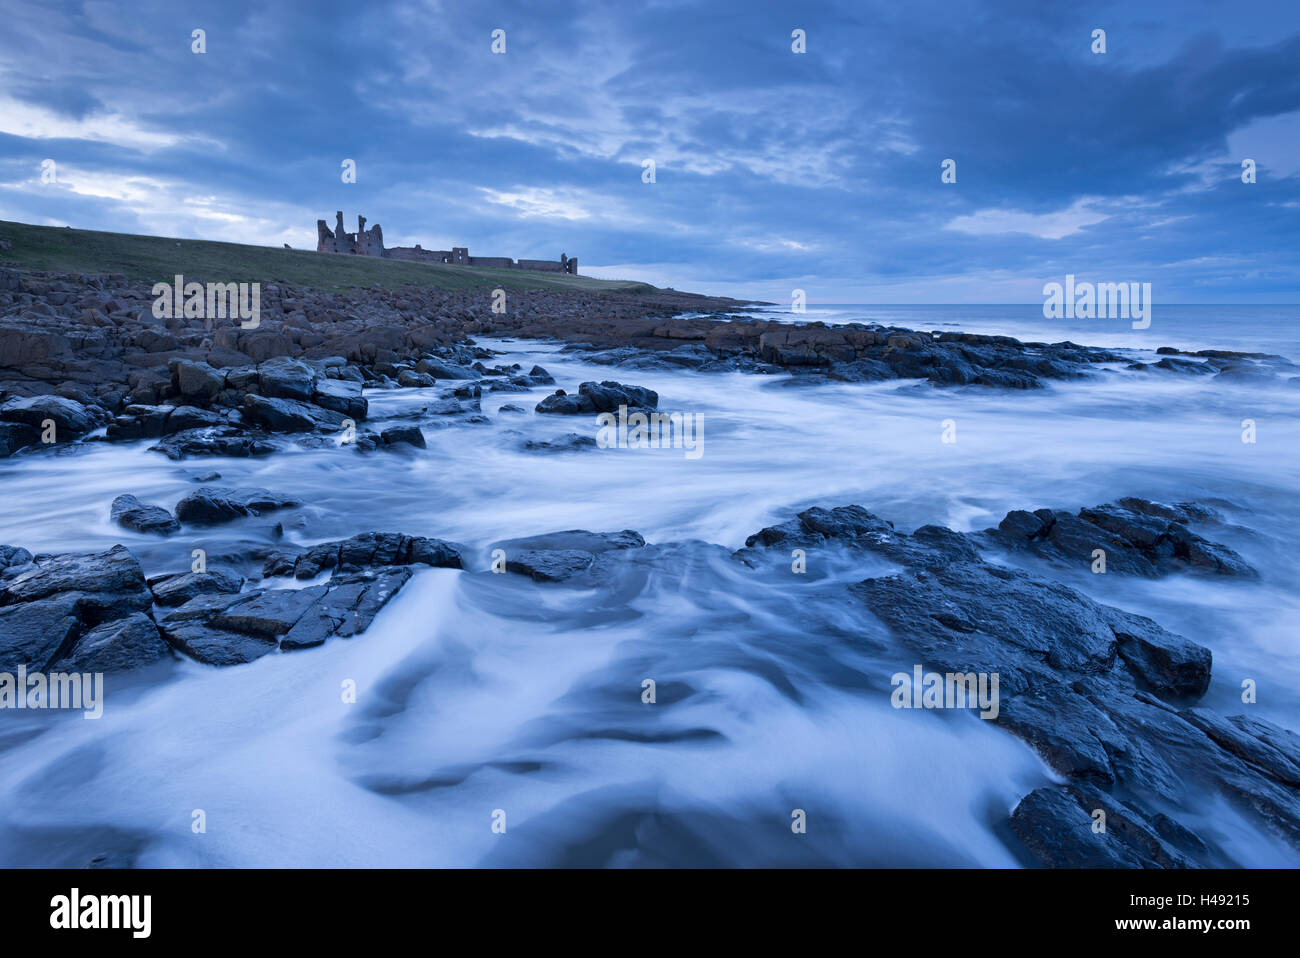 Waves swirl around the rocky shores below Dunstanburgh Castle at twilight, Northumberland, England. Spring (March) 2014. Stock Photo